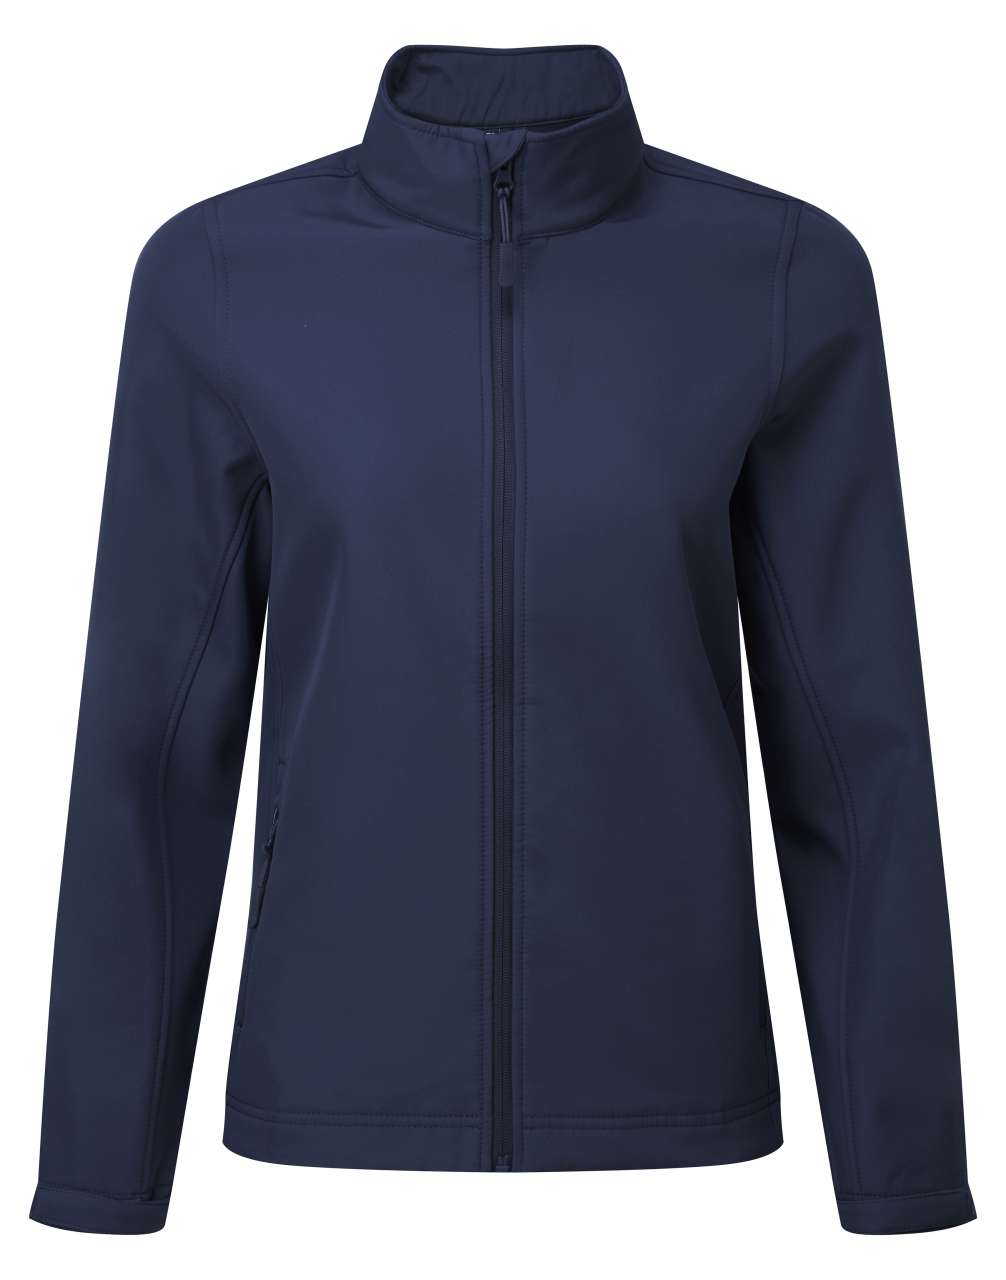 WOMEN’S WINDCHECKER® PRINTABLE & RECYCLED SOFTSHELL JACKET